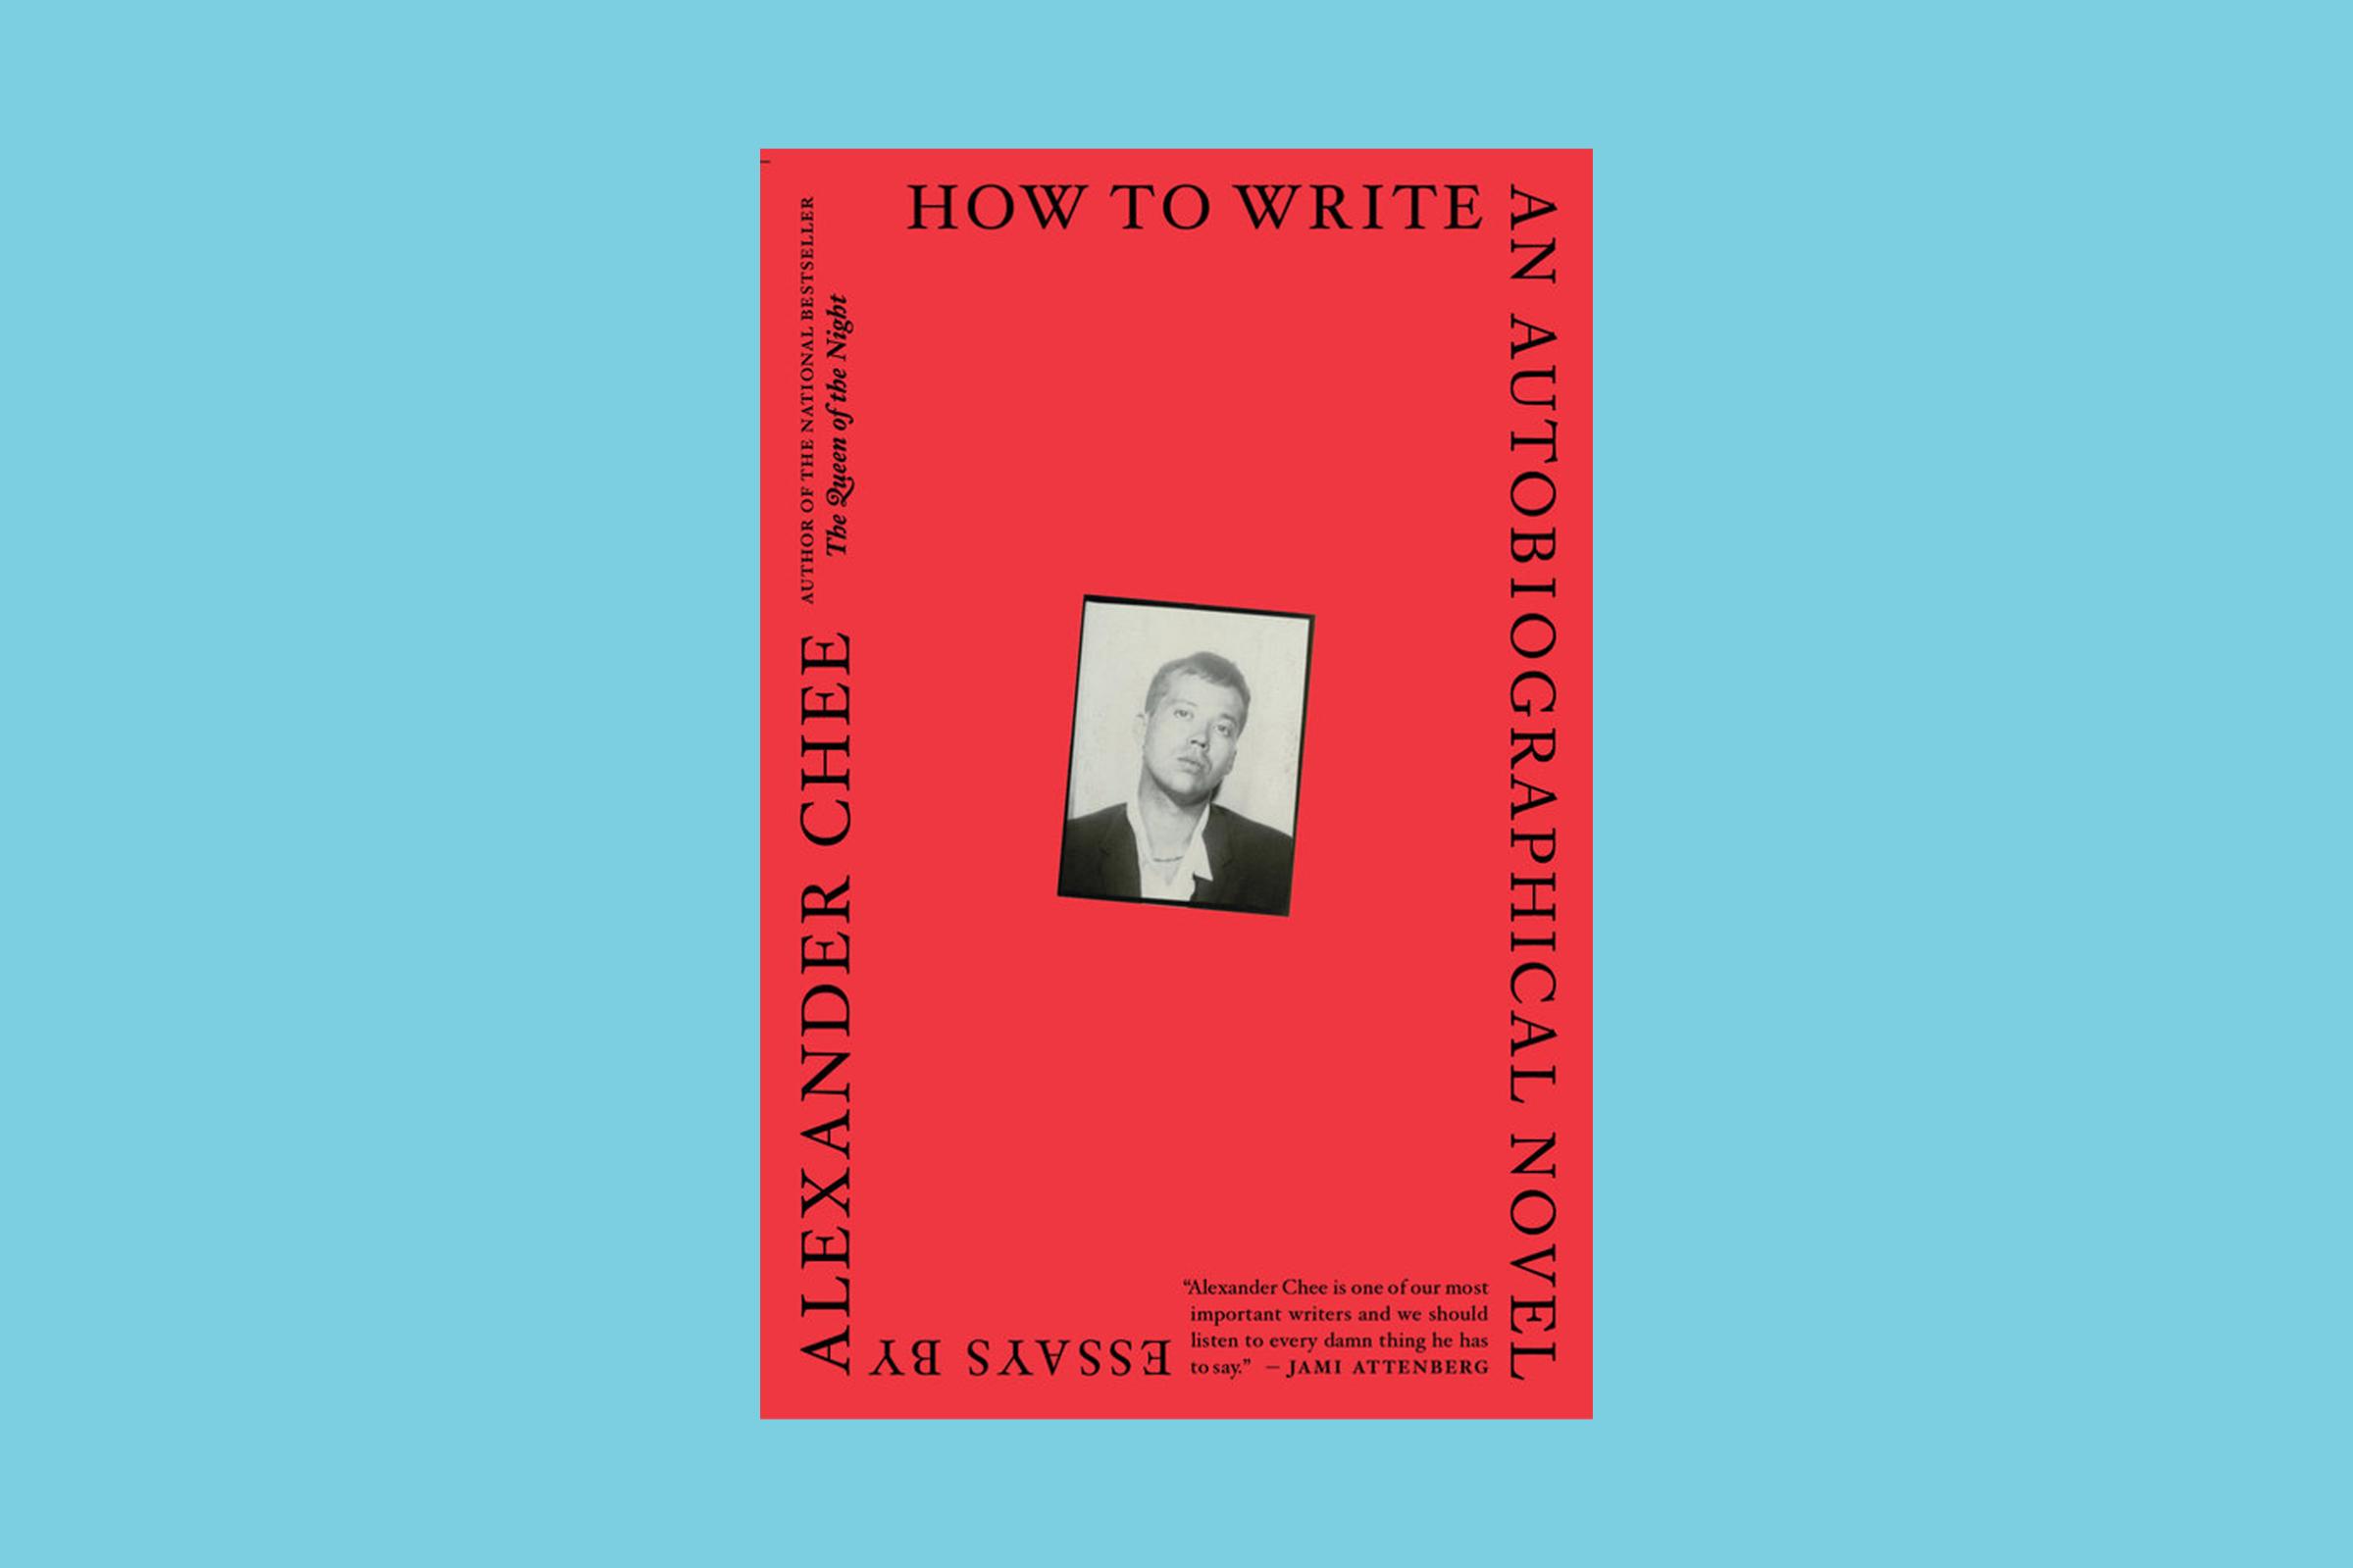 How to Write an Autobiographical Novel, Alexander Chee, Mariner